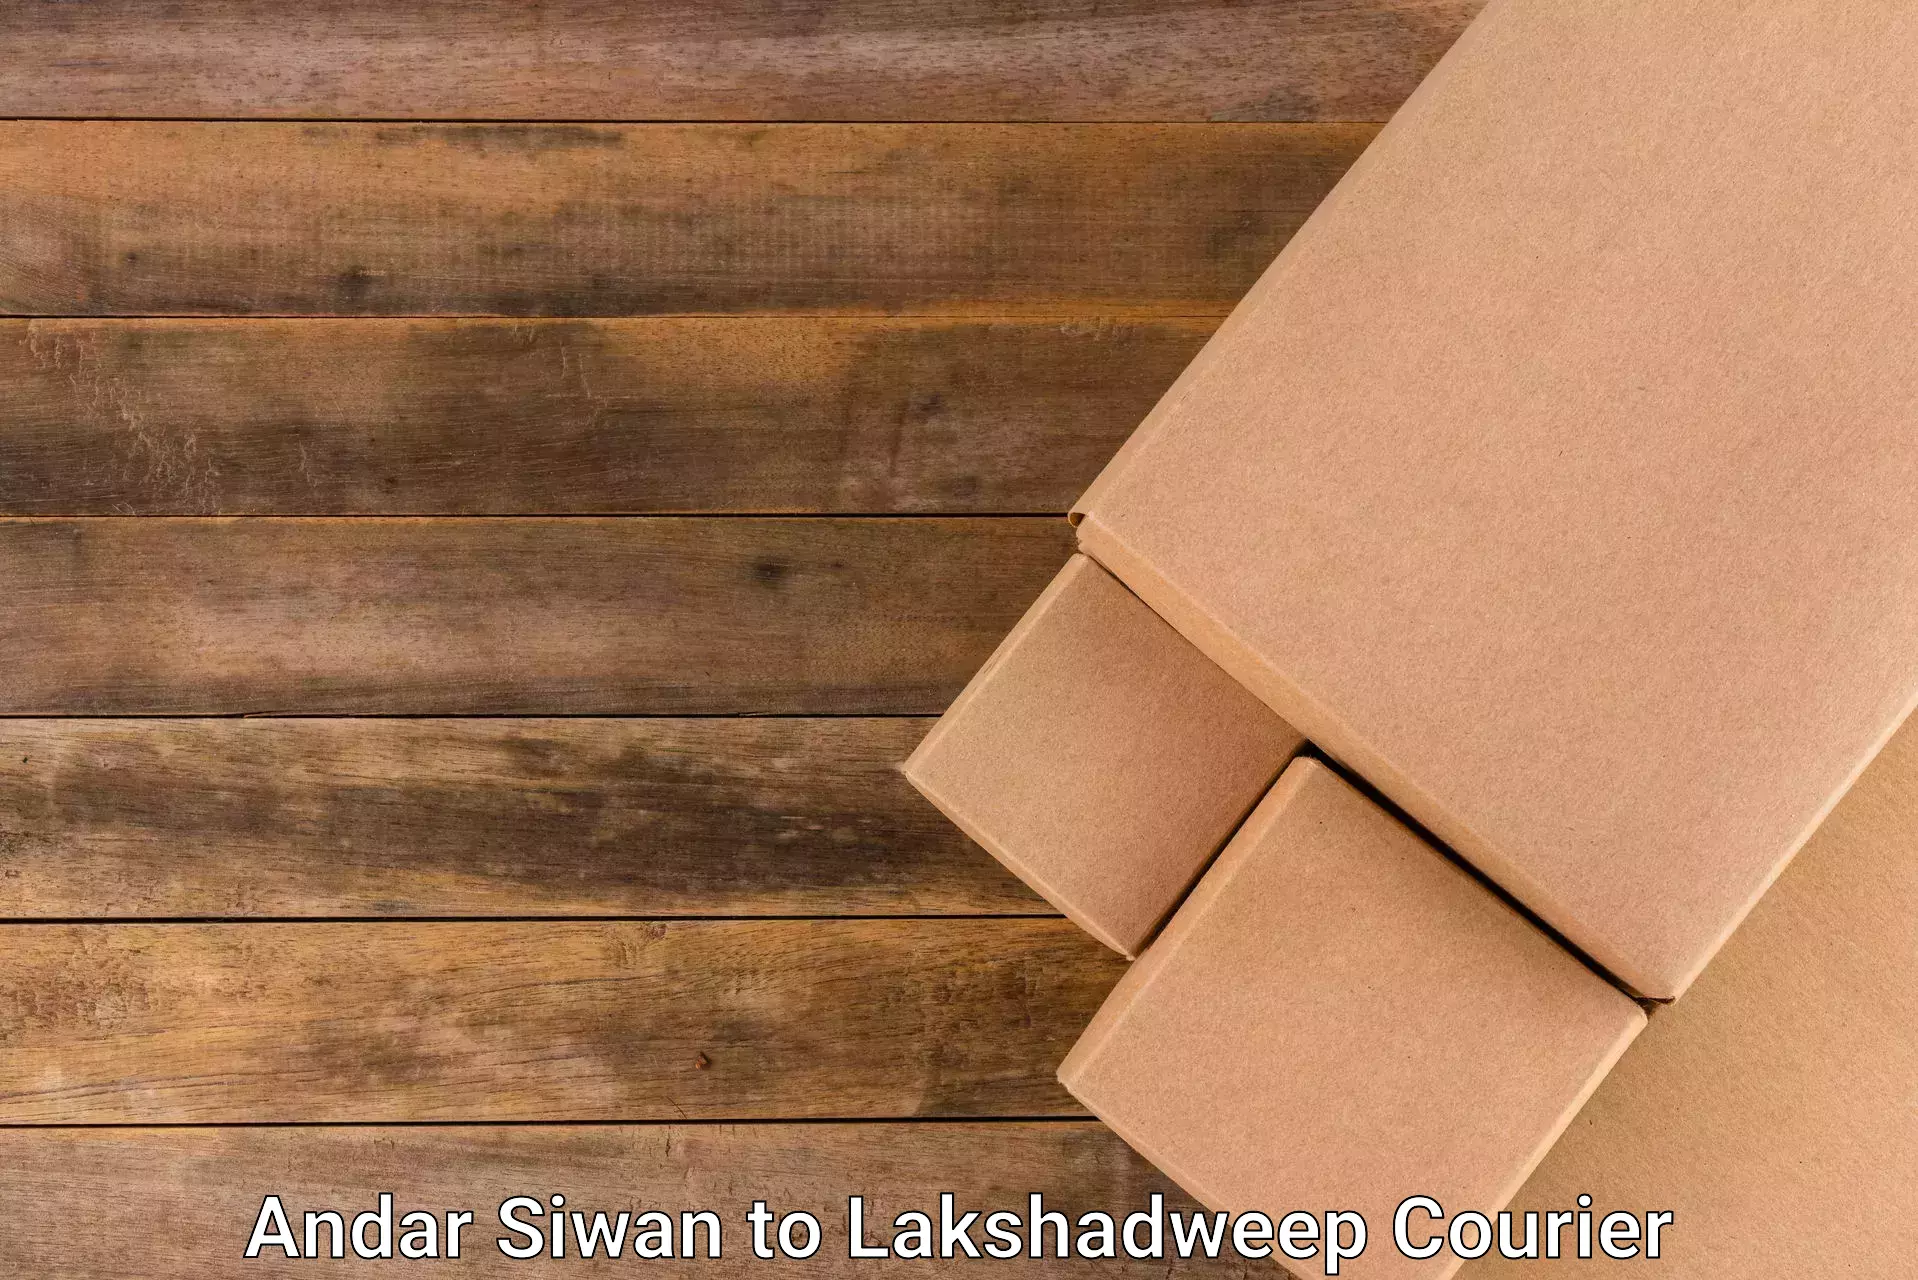 Cash on delivery service Andar Siwan to Lakshadweep